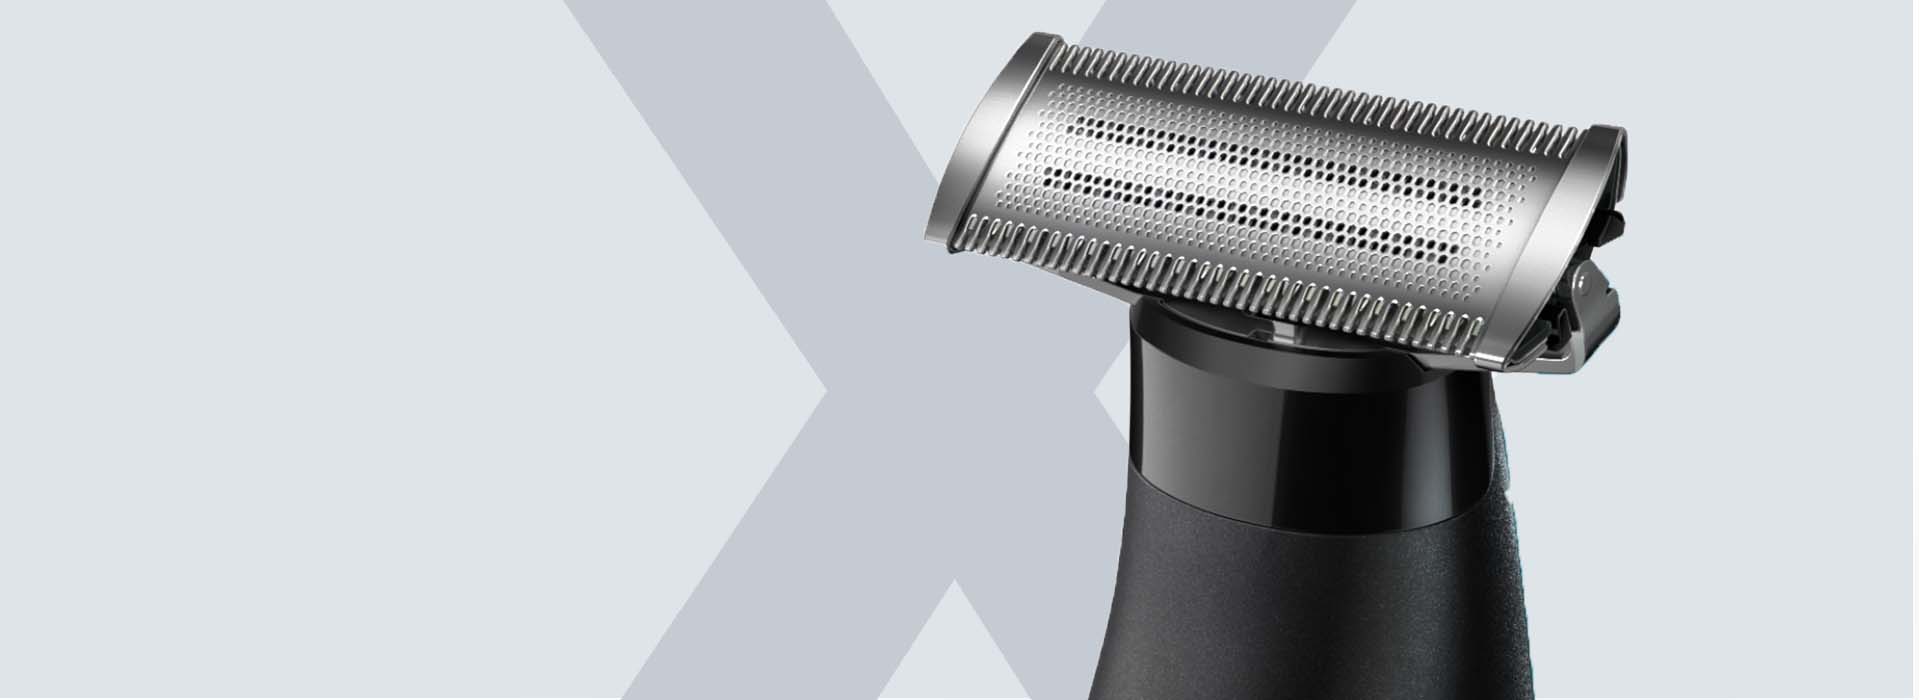 image of Series X blade head behind a light grey background with a darker grey X on it